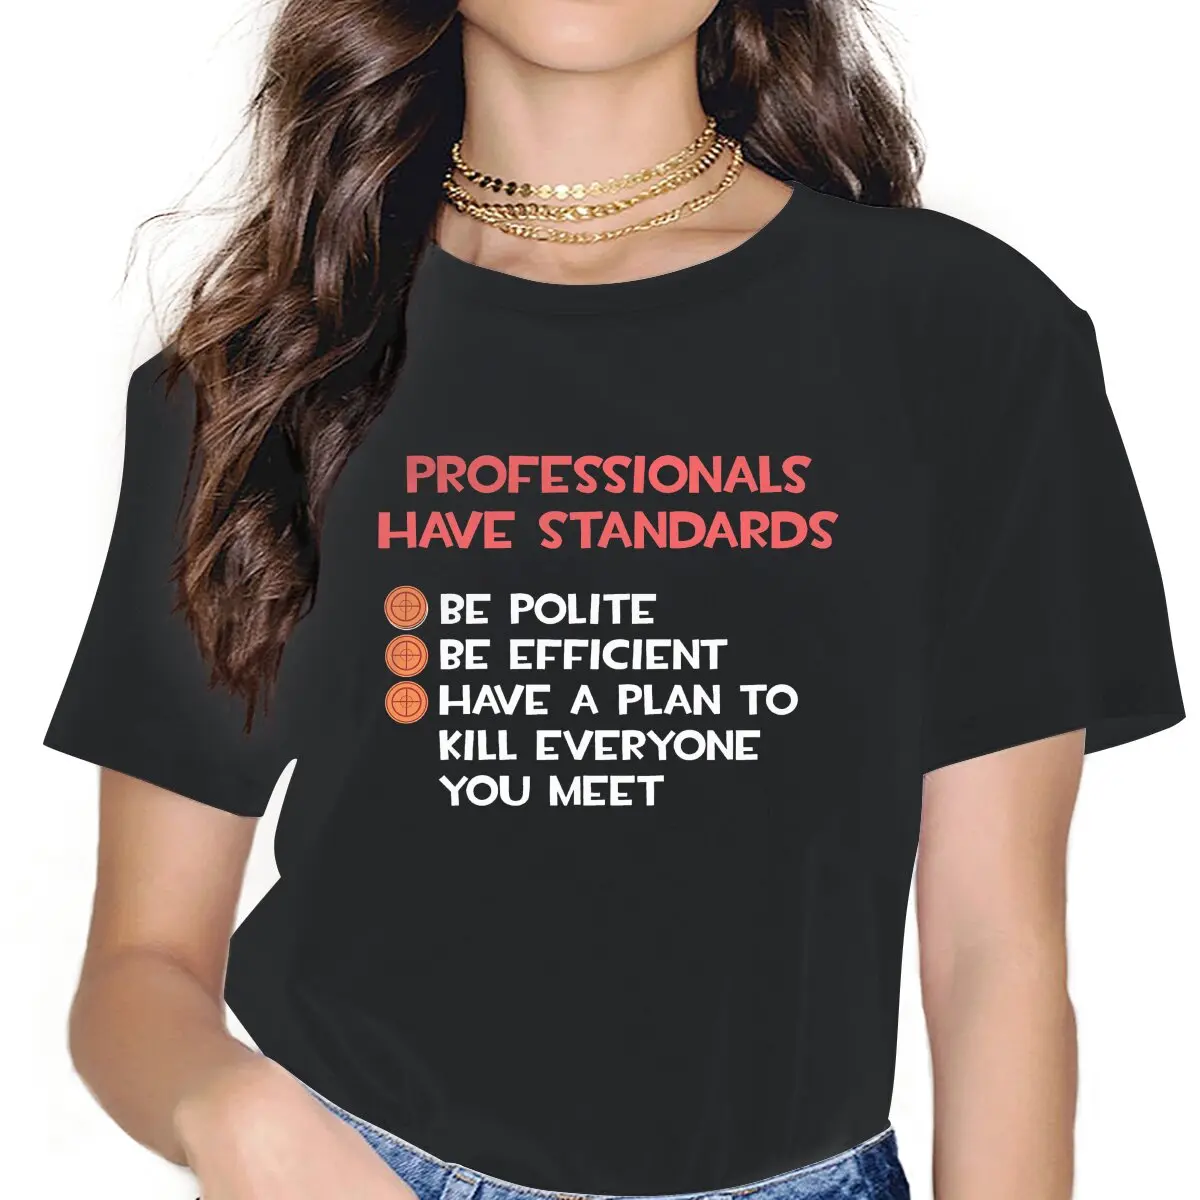 Professionals Funny Meme Feminine Shirts Team Fortress 2 Shooter Game Oversized T shirt Goth Vintage Female - Team Fortress 2 Merch